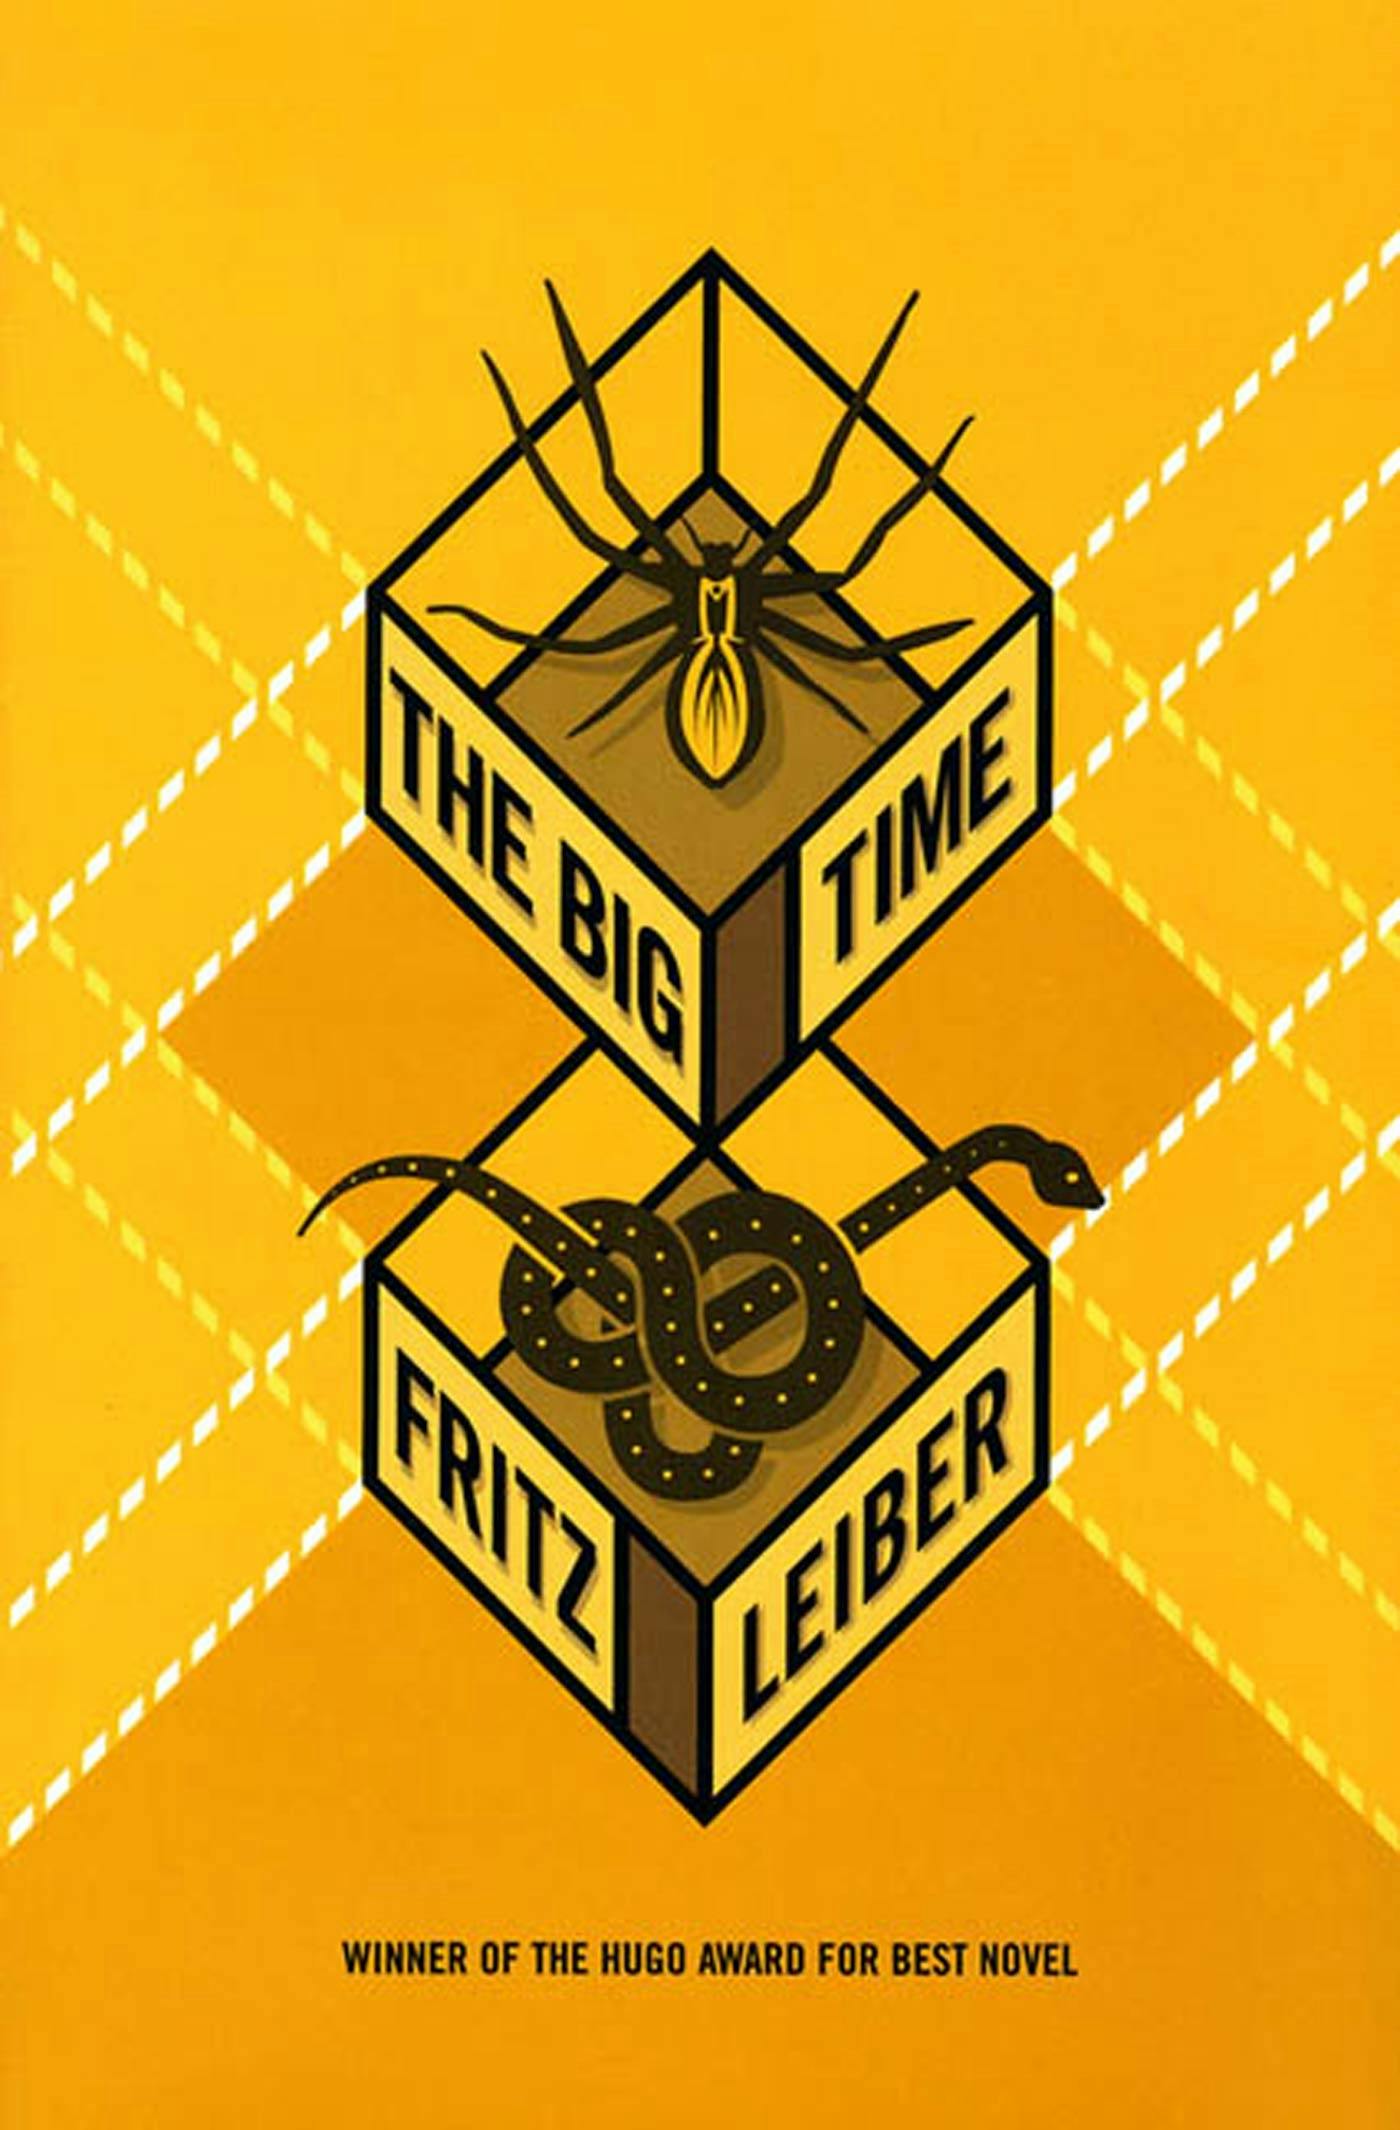 Cover for the book titled as: The Big Time